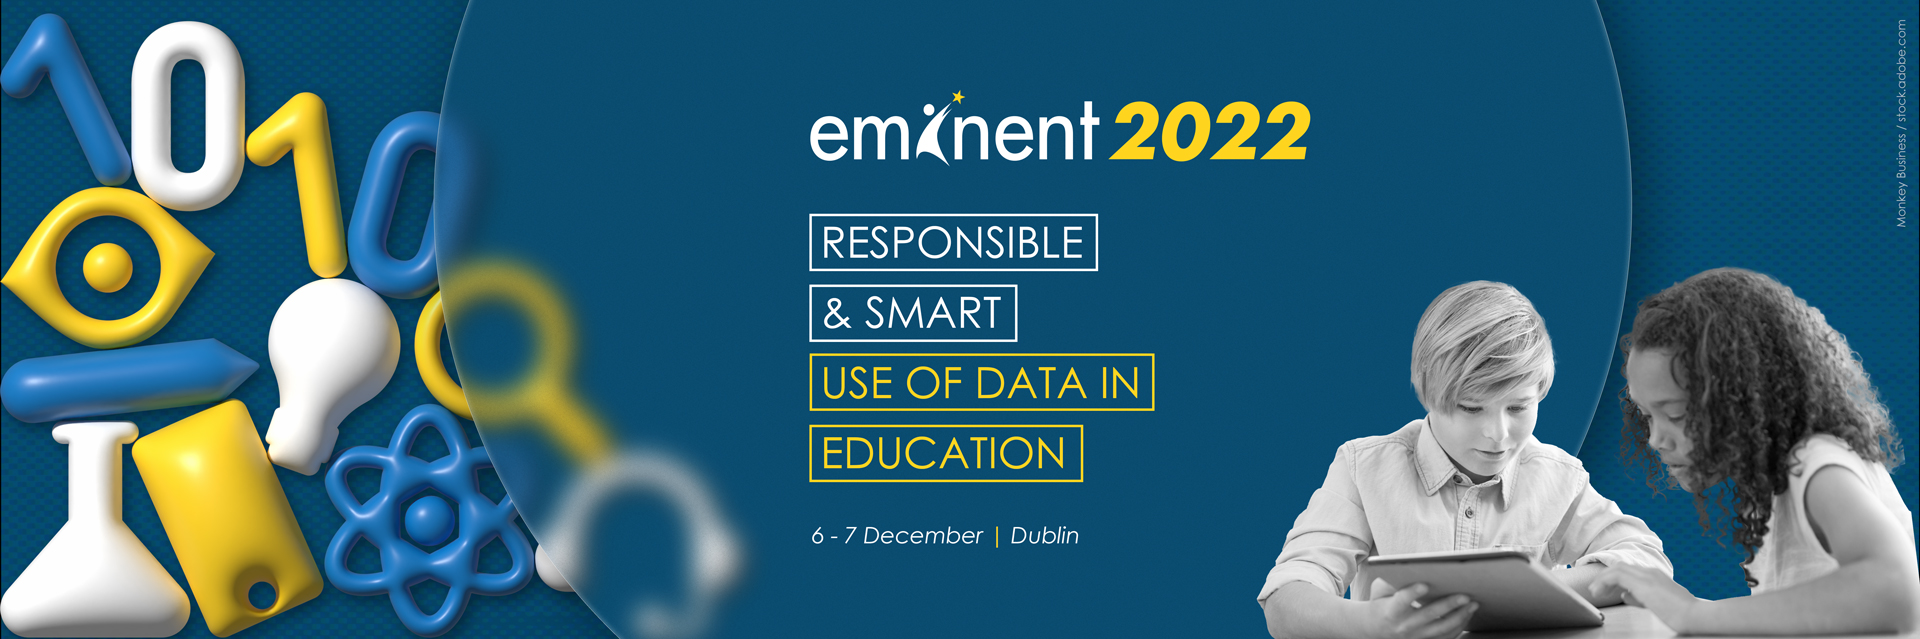 EMINENT 2022 - Responsible & Smart : Use of Data in Education